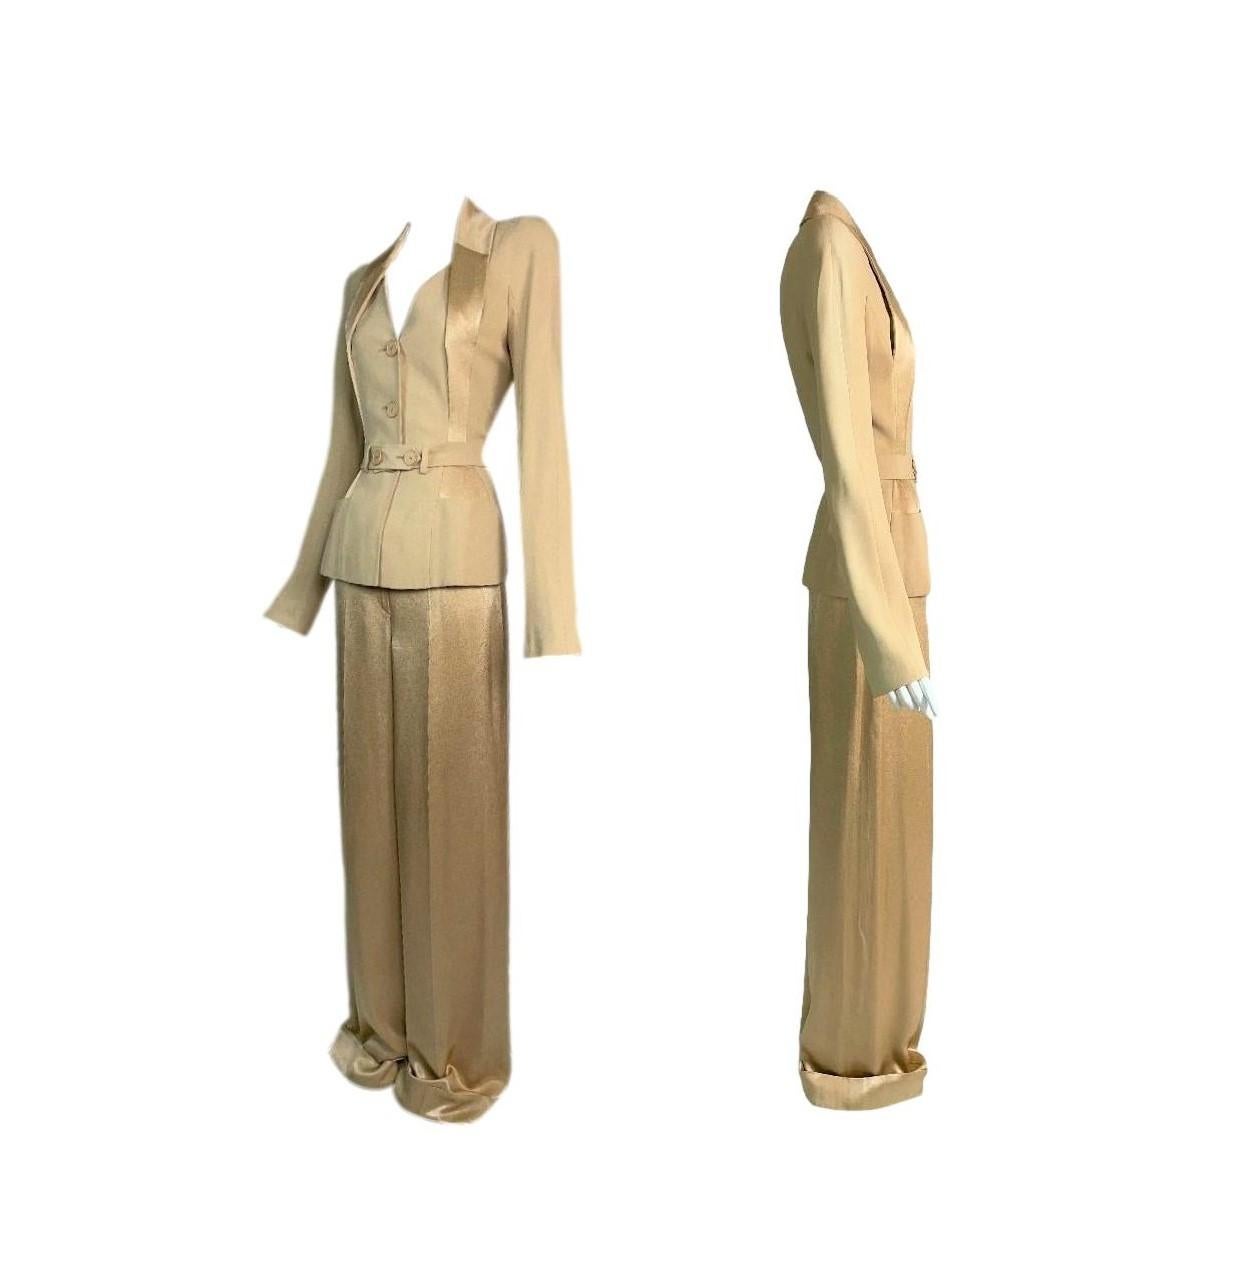 **THANK YOU FOR SHOPPING WITH MES DEUX FILLES**

DESIGNER: Circa F/W 2008 Christian Dior Haute Couture- inner fabric/year labels are not present so we are estimating the year based on the style. 
CONDITION: Good- down the right sleeve it is slightly